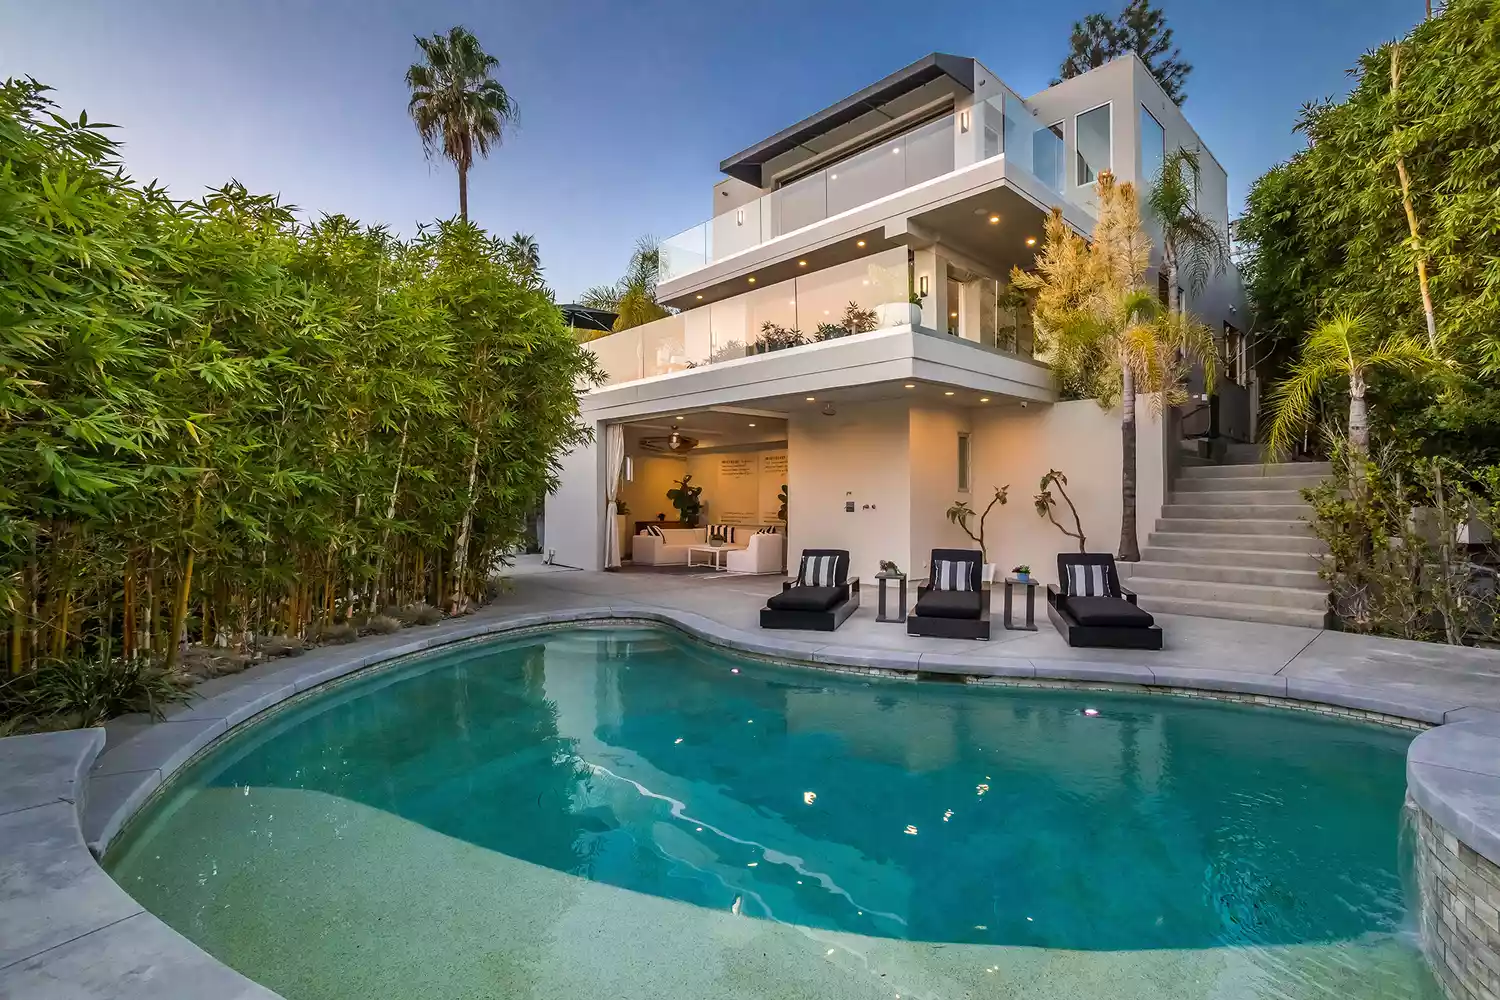 Harry Styles' former mansion on sale